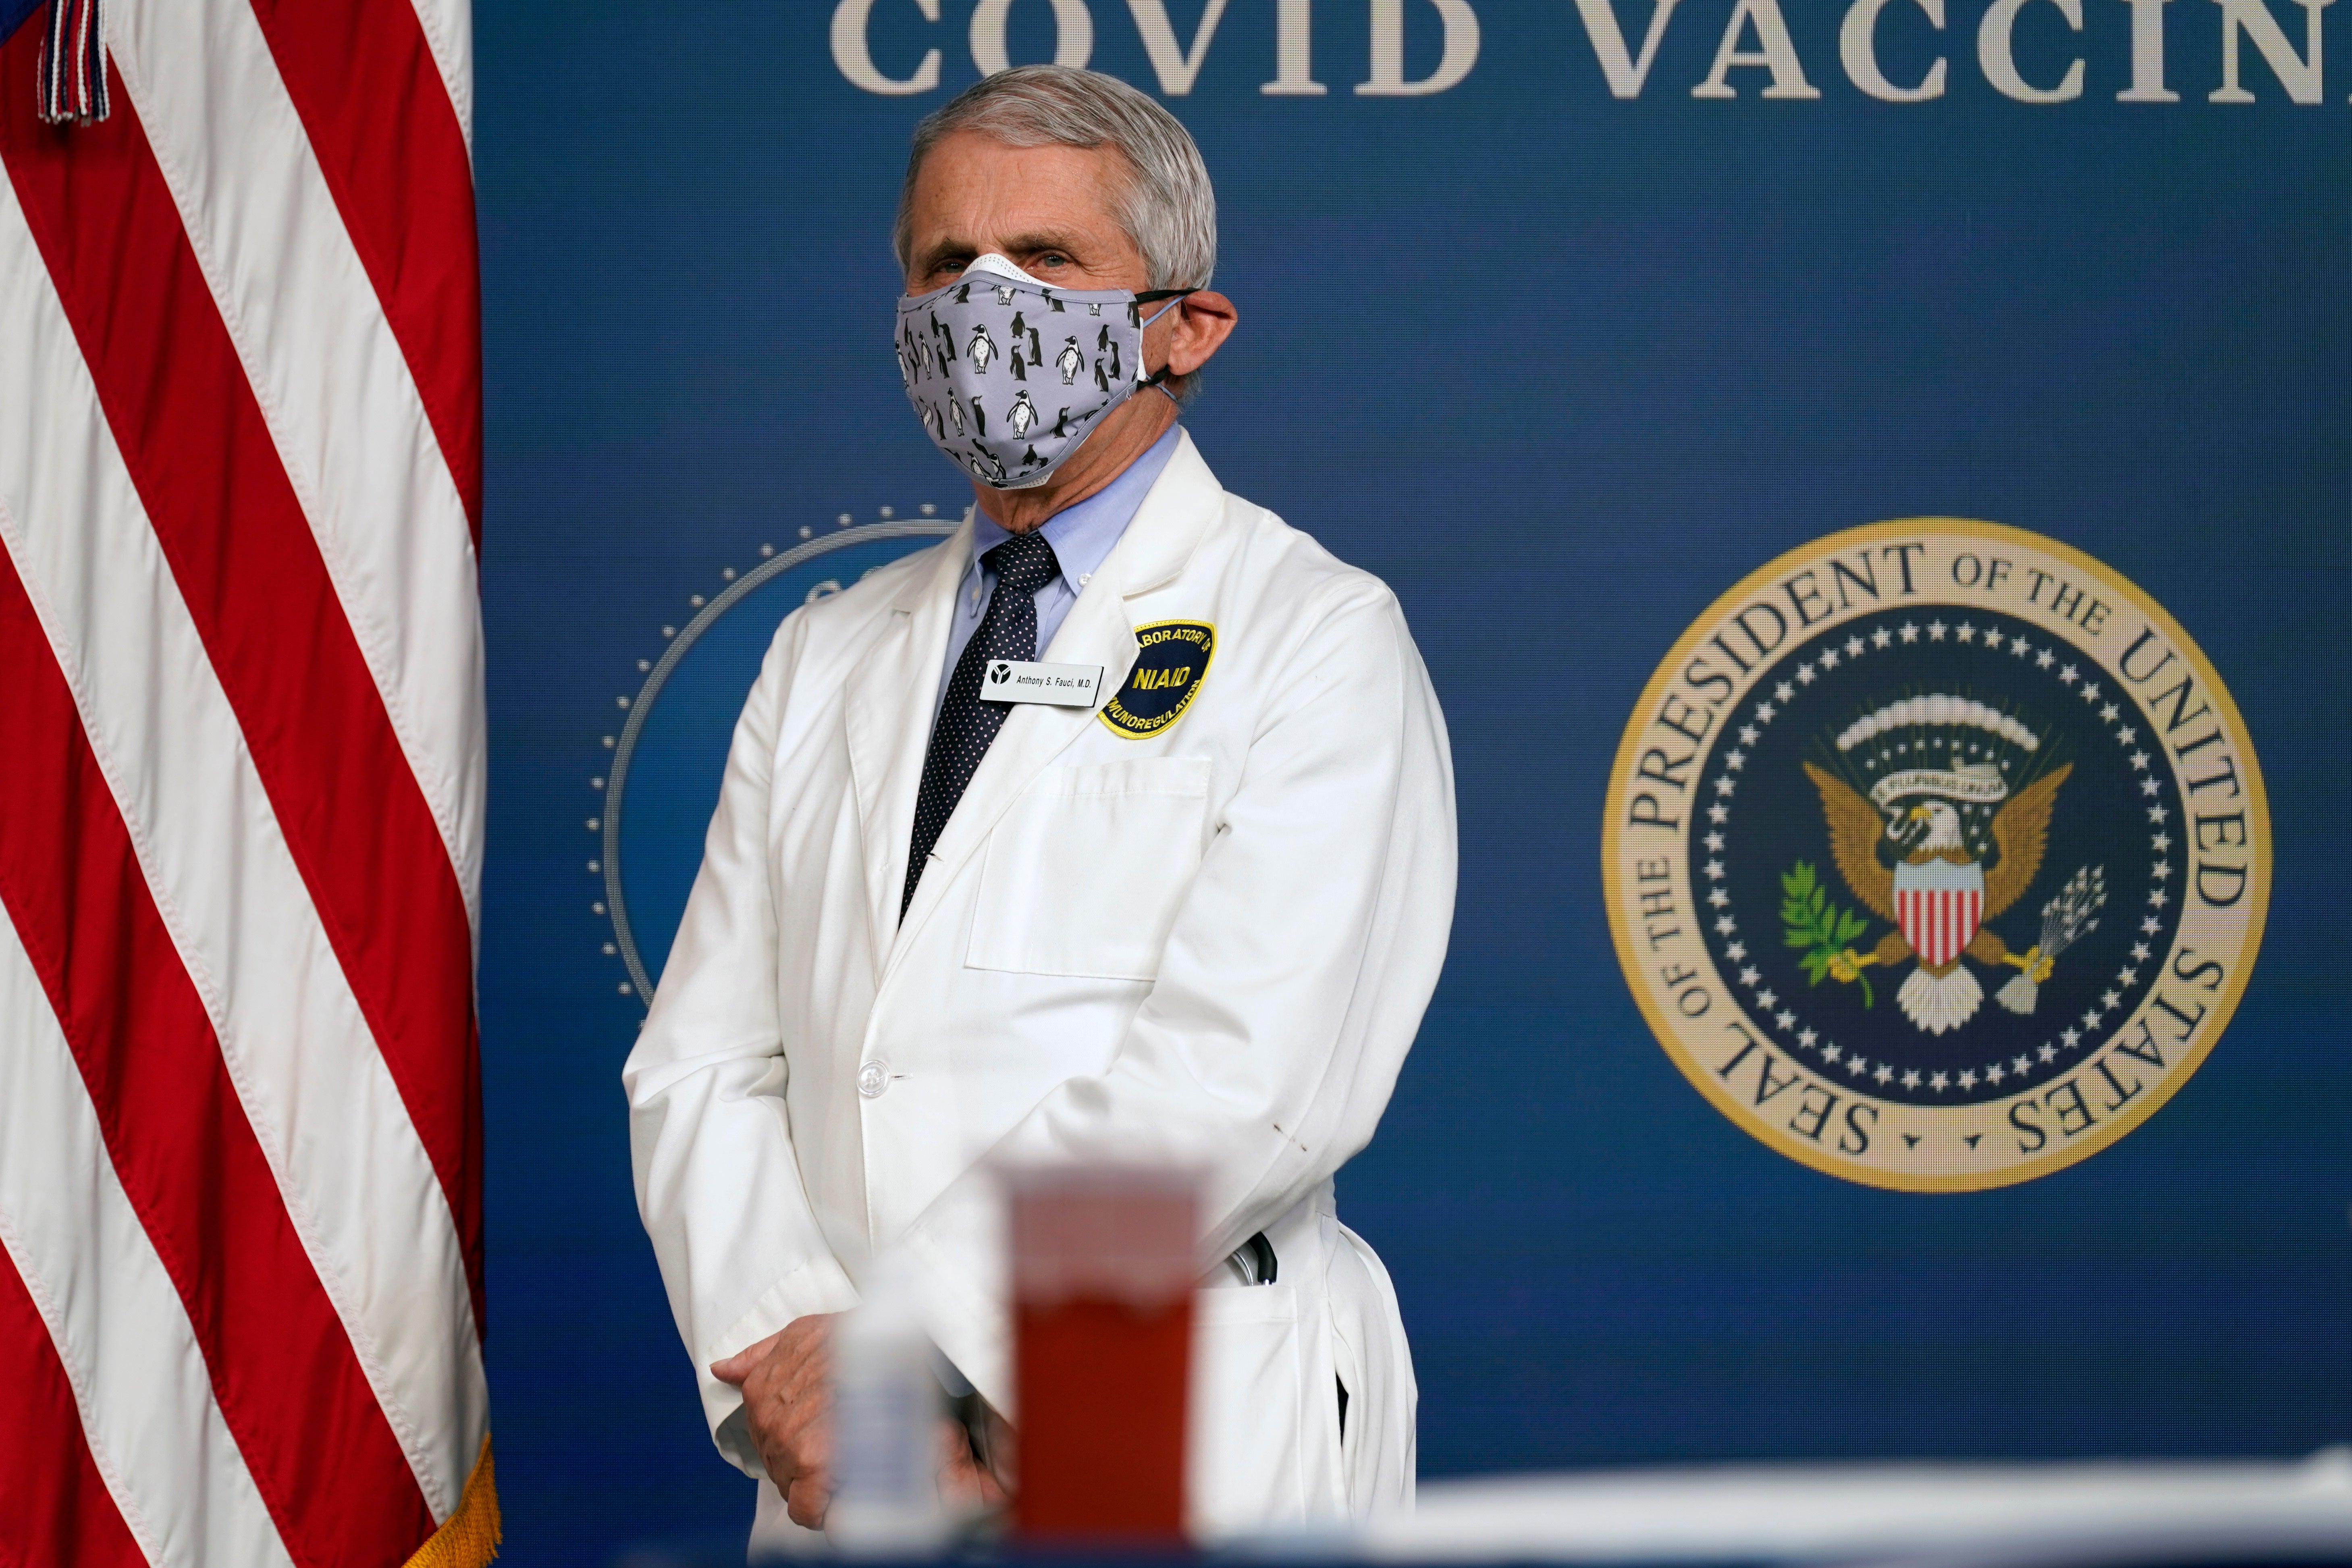 Dr. Anthony Fauci, director of the National Institute of Allergy and Infectious Diseases, in the South Court Auditorium on the White House campus, Thursday, Feb. 25, 2021, in Washington.